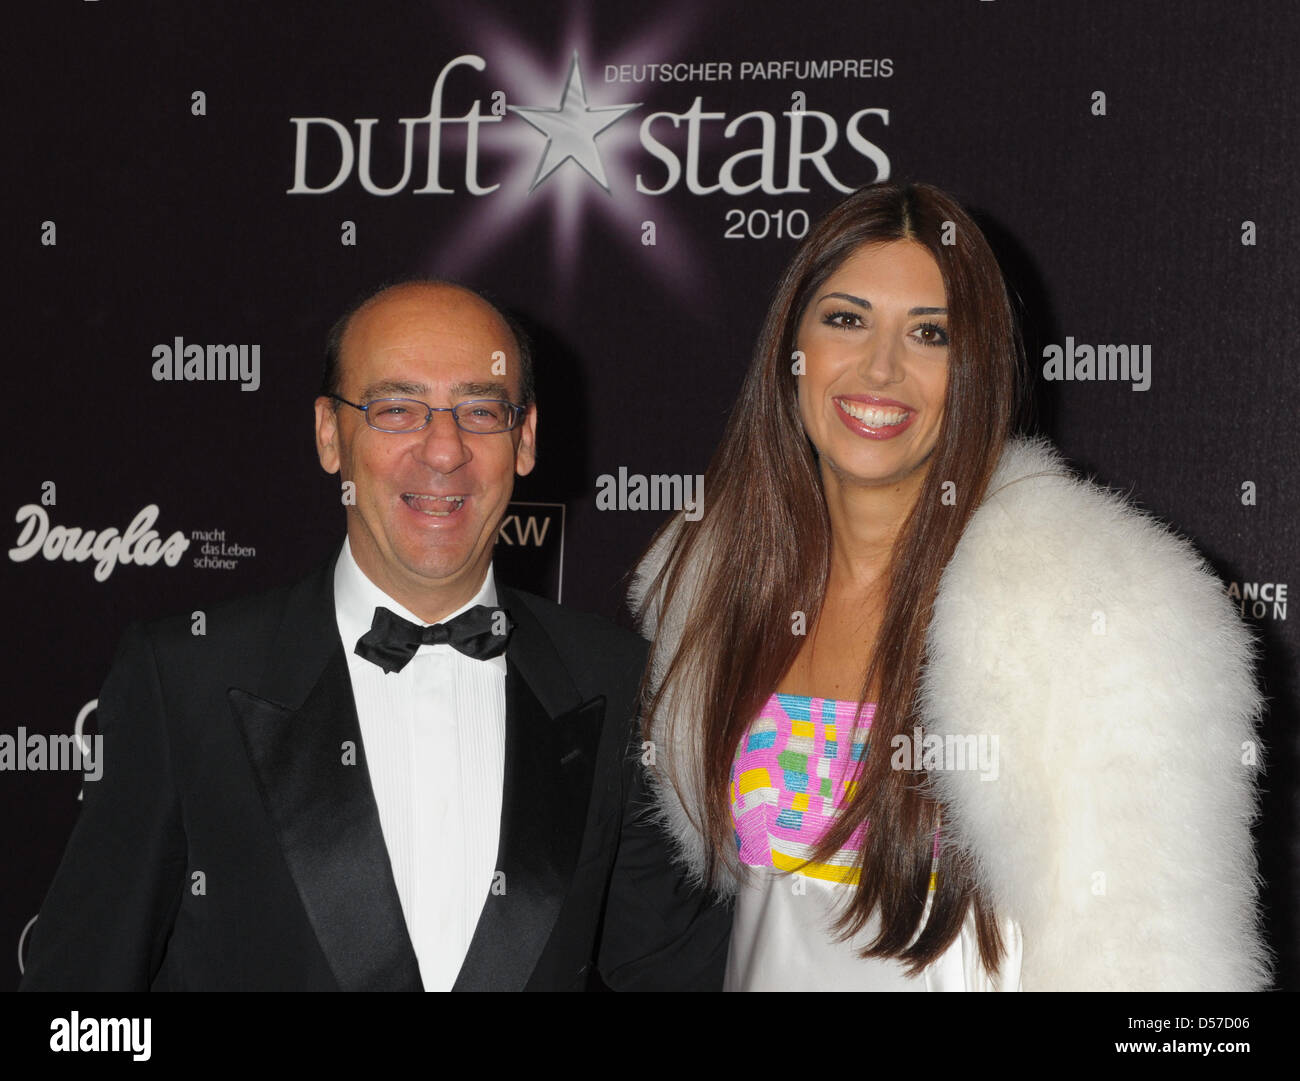 Italian fashion designer Lavinia Biagiotti with male company arrives to the award ceremony of the German Fragrance Award ''Duftstars 2010'' in Berlin, Germany, 07 May 2010. The prize is awarded in several categories by the ''Fragrance Foundation''. Photo: SOEREN STACHE Stock Photo